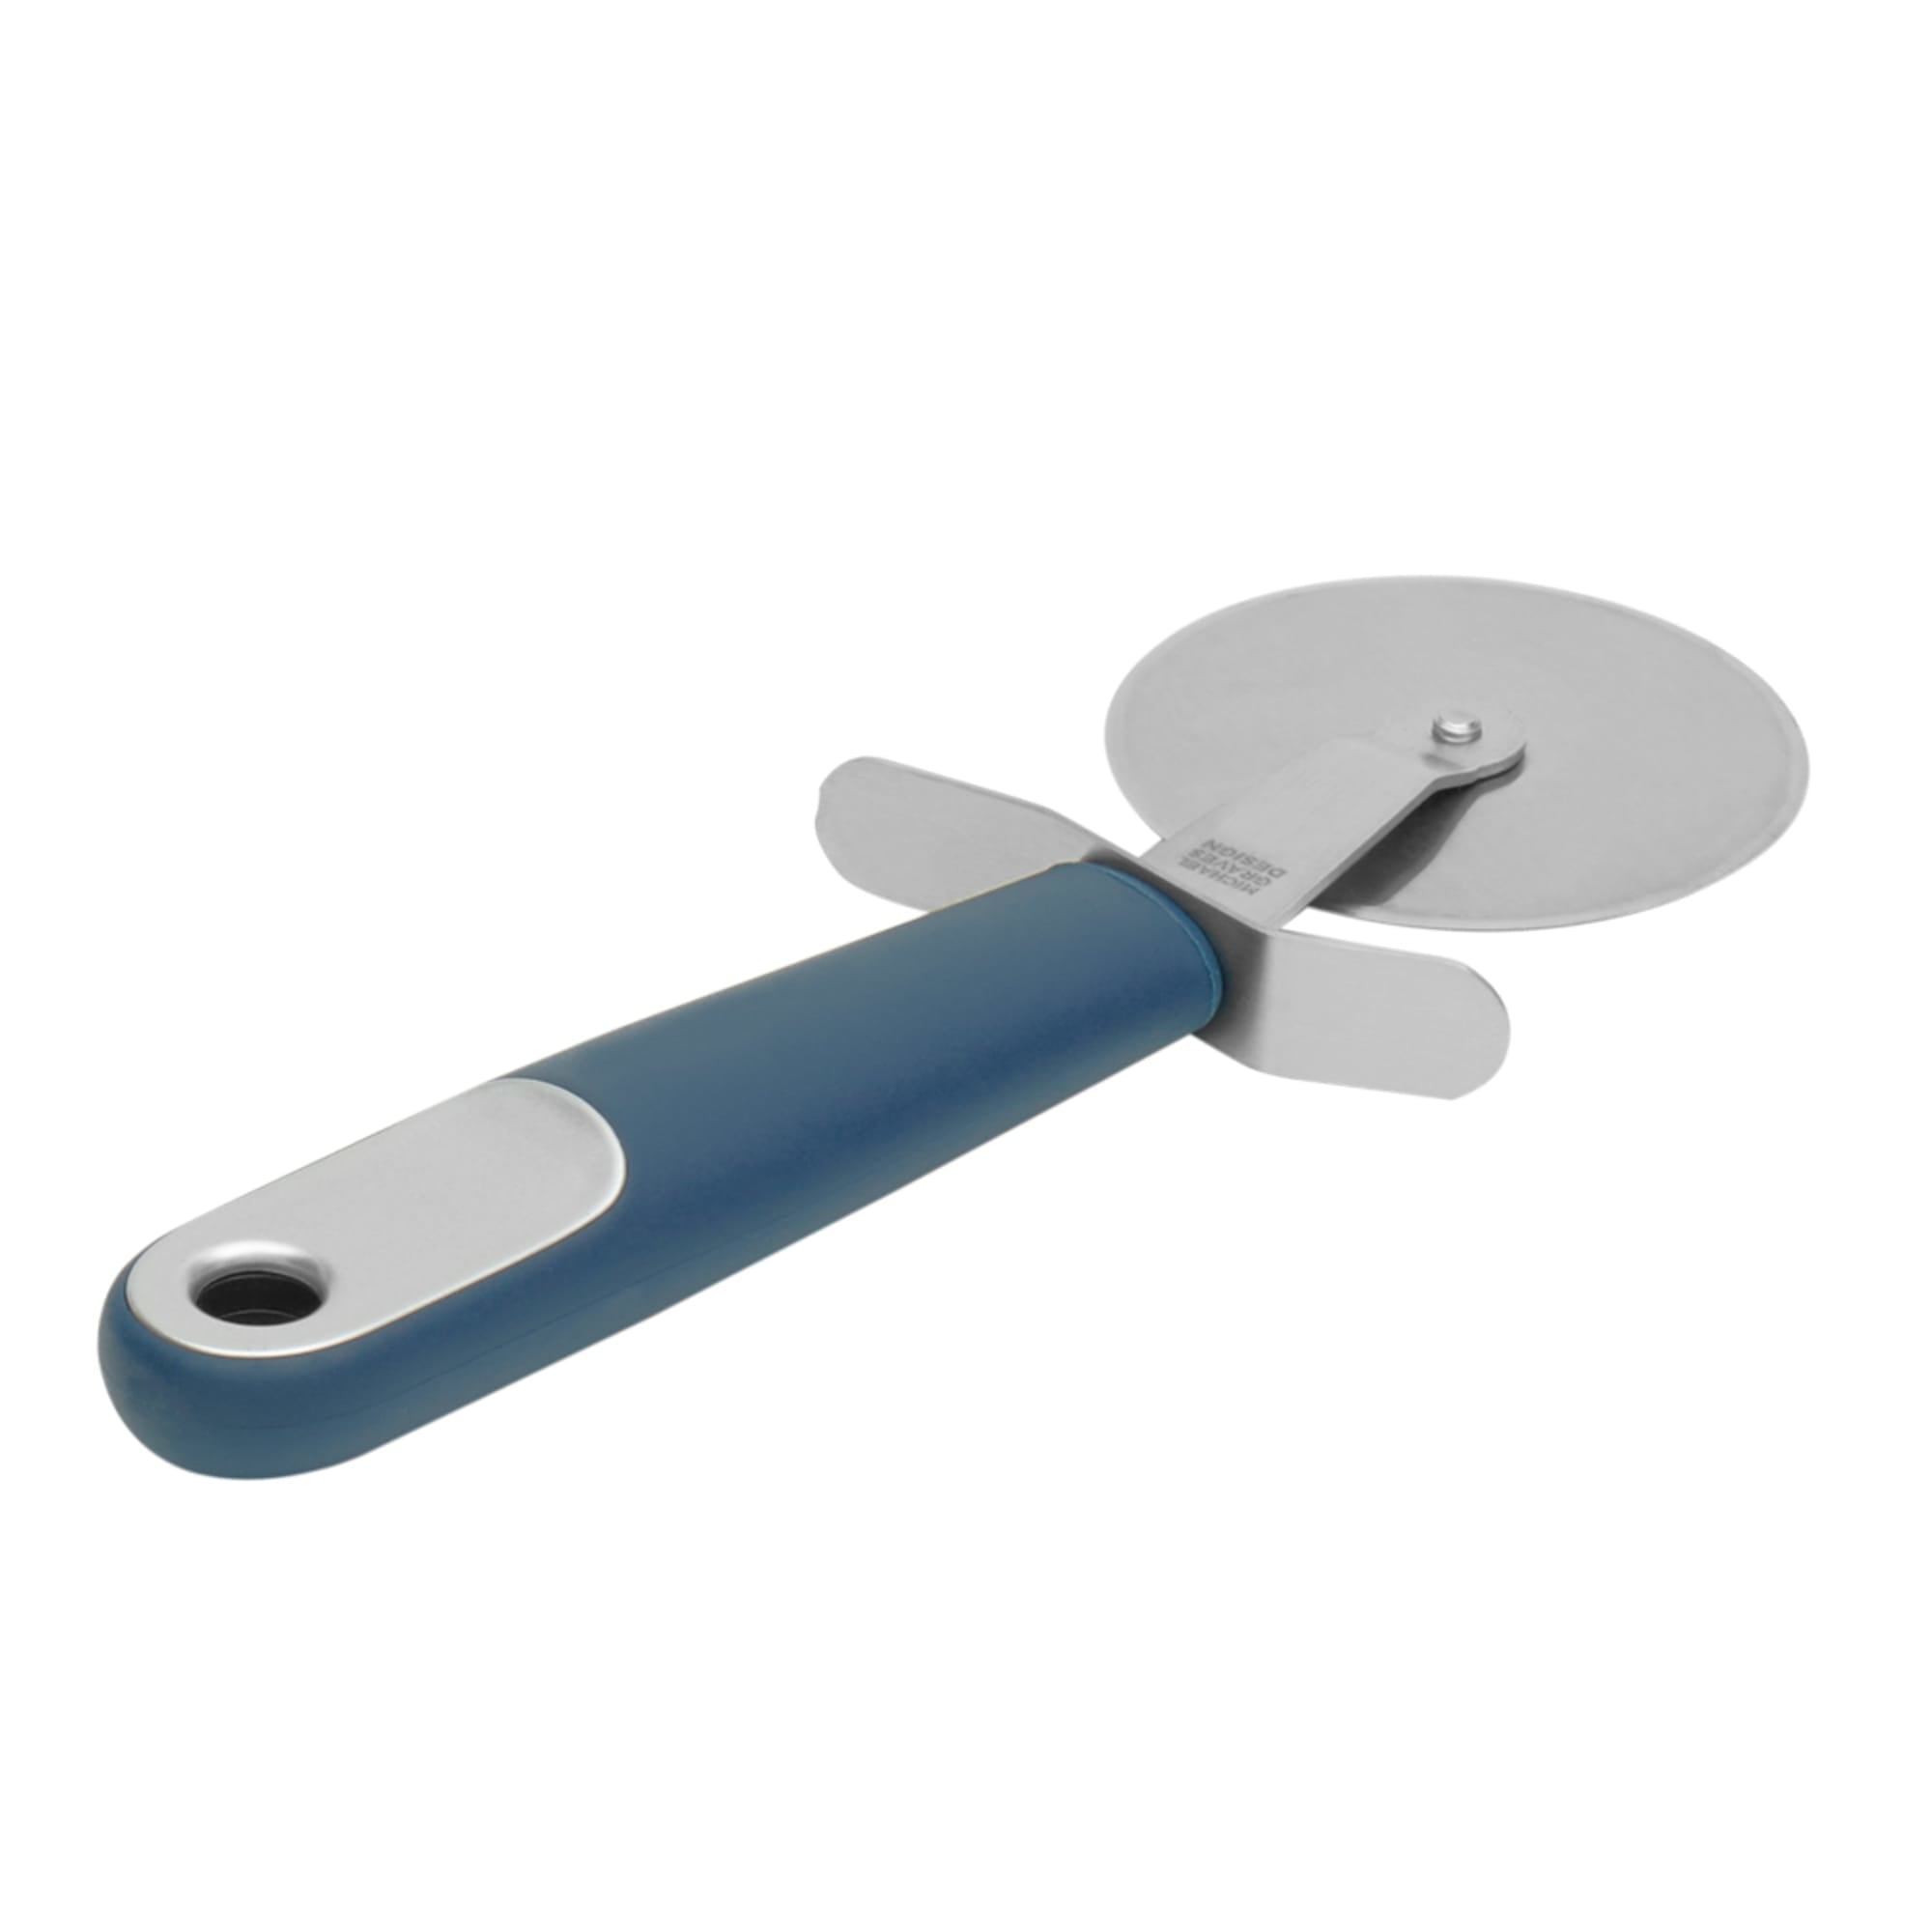 Michael Graves Design Comfortable Grip Stainless Steel Easy Rotary Pizza Cutter, Indigo $3.00 EACH, CASE PACK OF 24